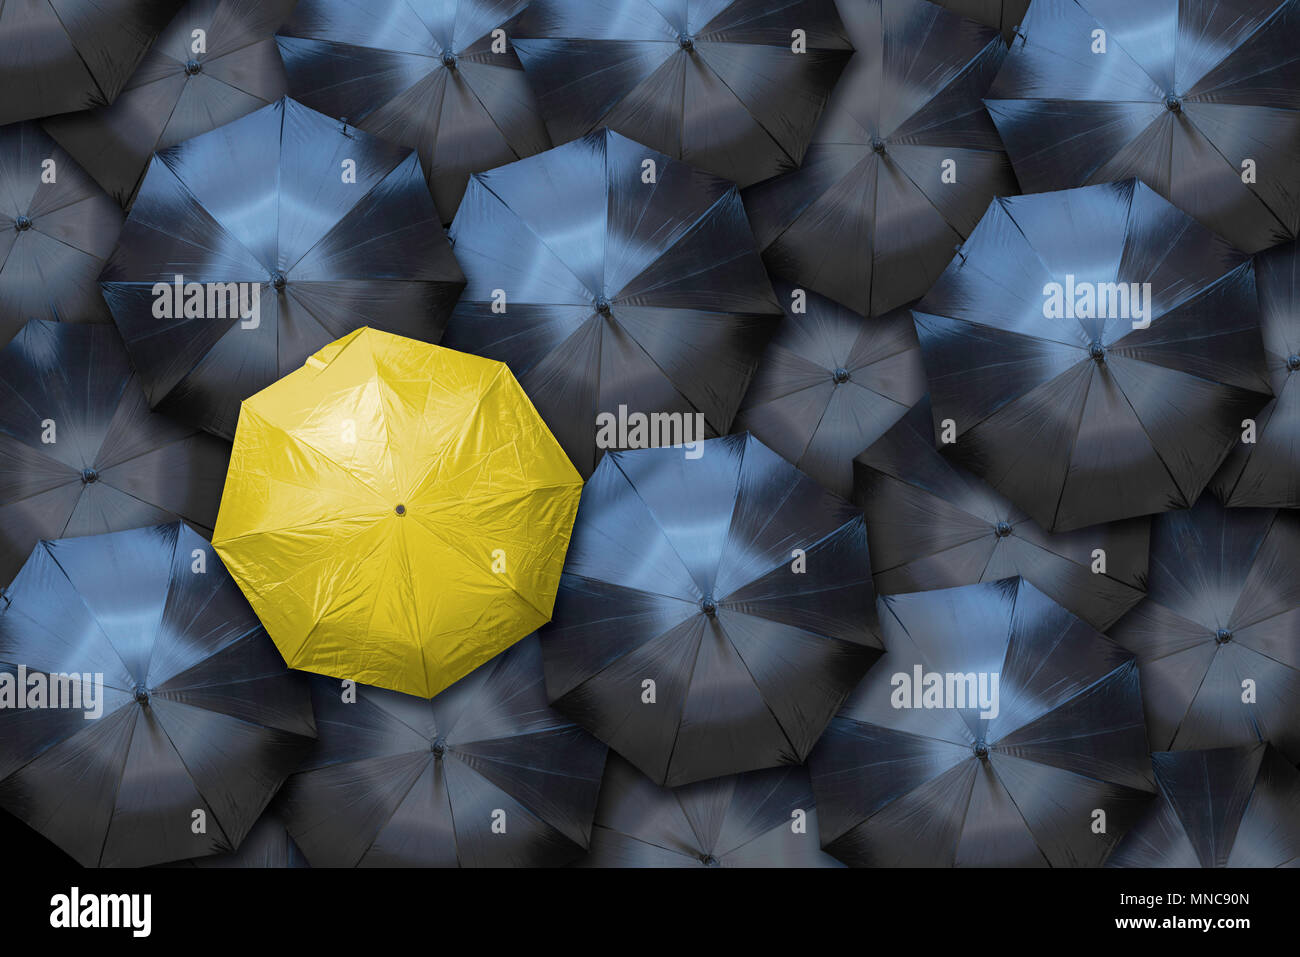 A yellow umbrella stands out against a crowd of black ones. Individuality and leadership concept. Stock Photo